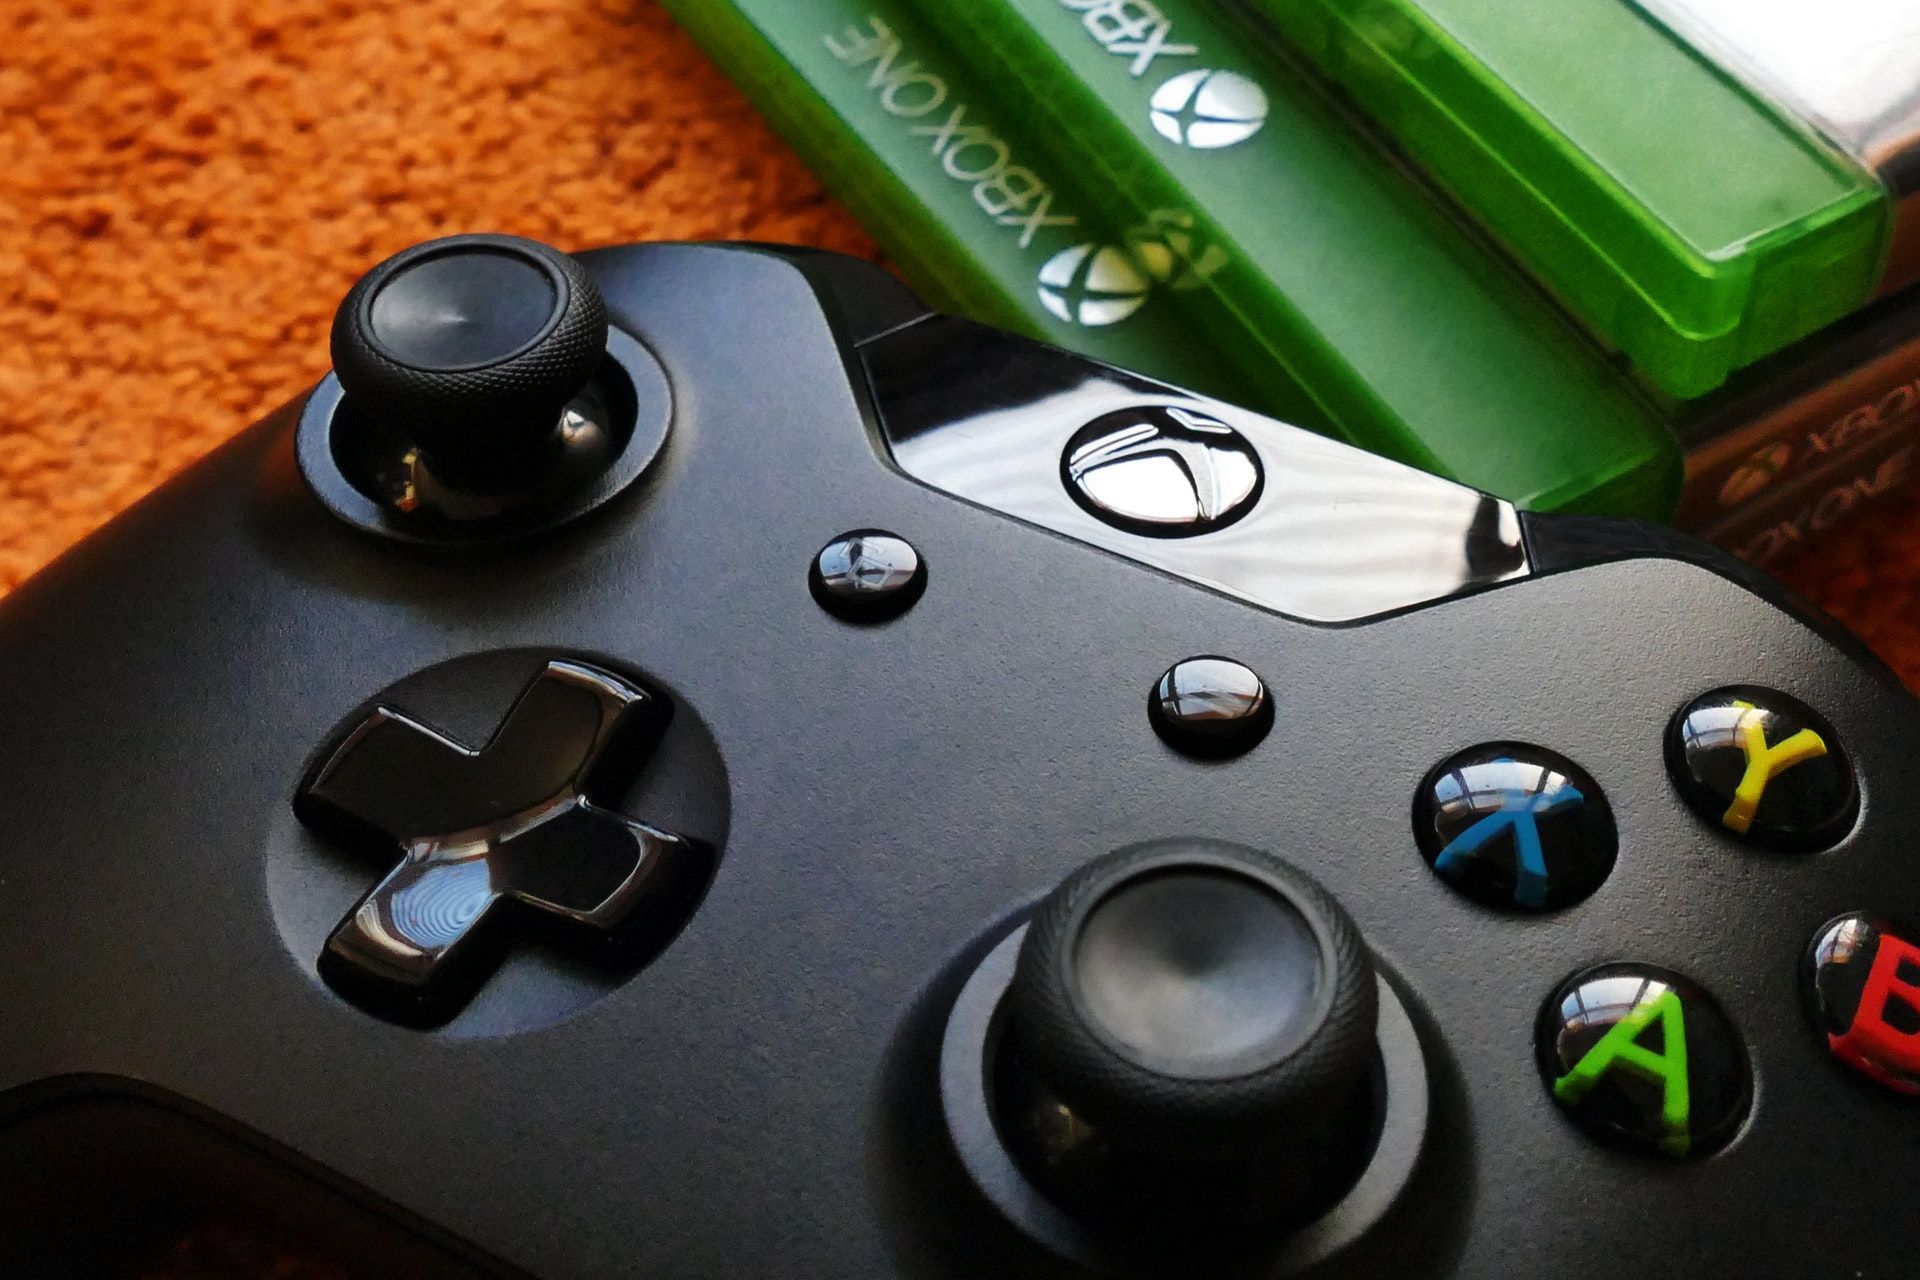 Microsoft plans to bring Xbox gaming to phones with Project xCloud